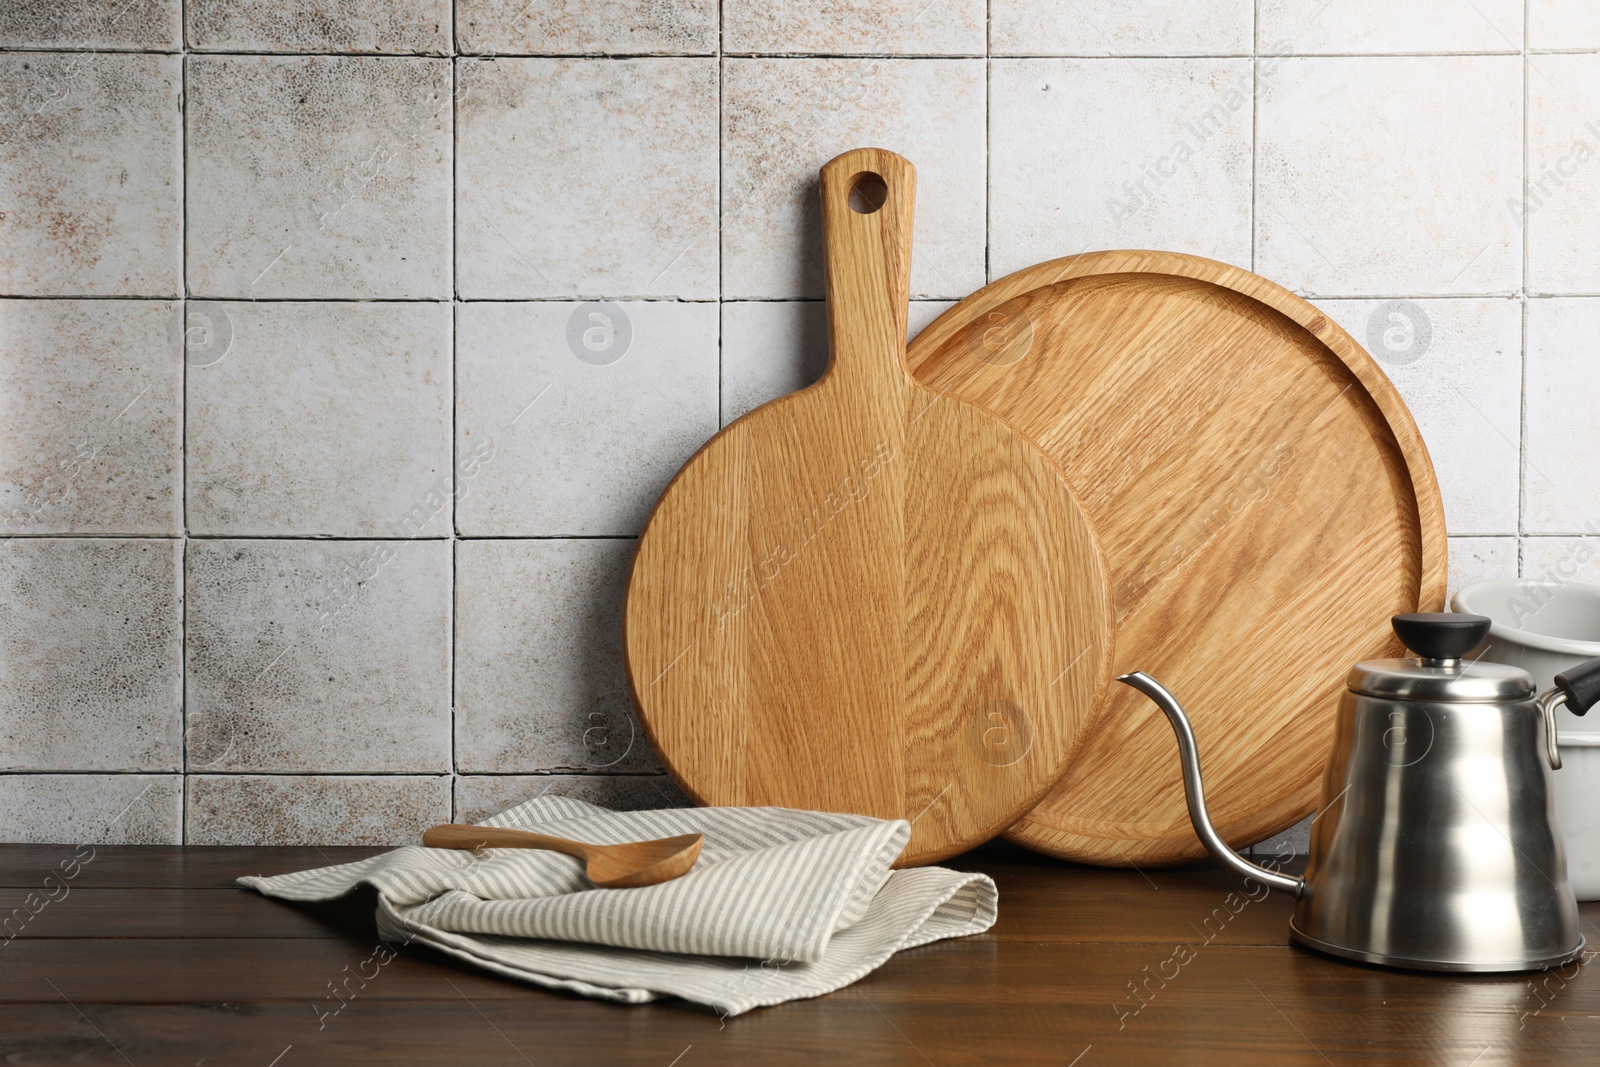 Photo of Wooden cutting boards, kettle and towel on table near tiled wall. Space for text